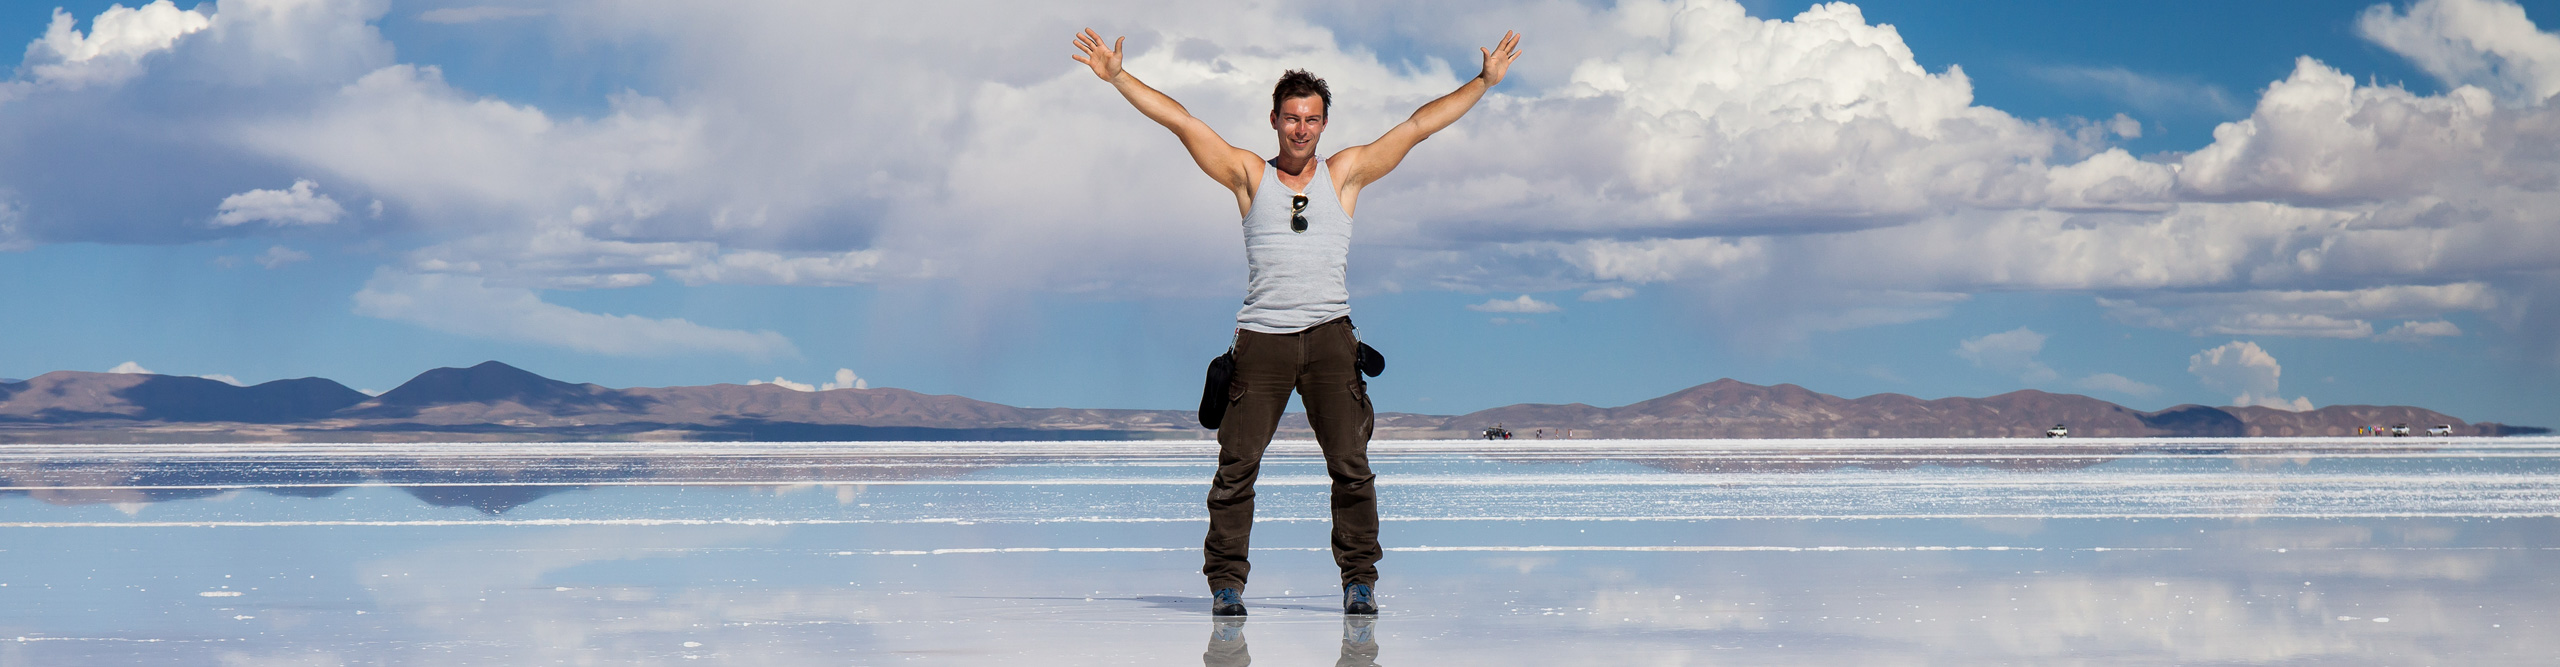 Man staning with arms outstretched on the Salt Flats of Uyuni, Bolivia, on a clear sunny day